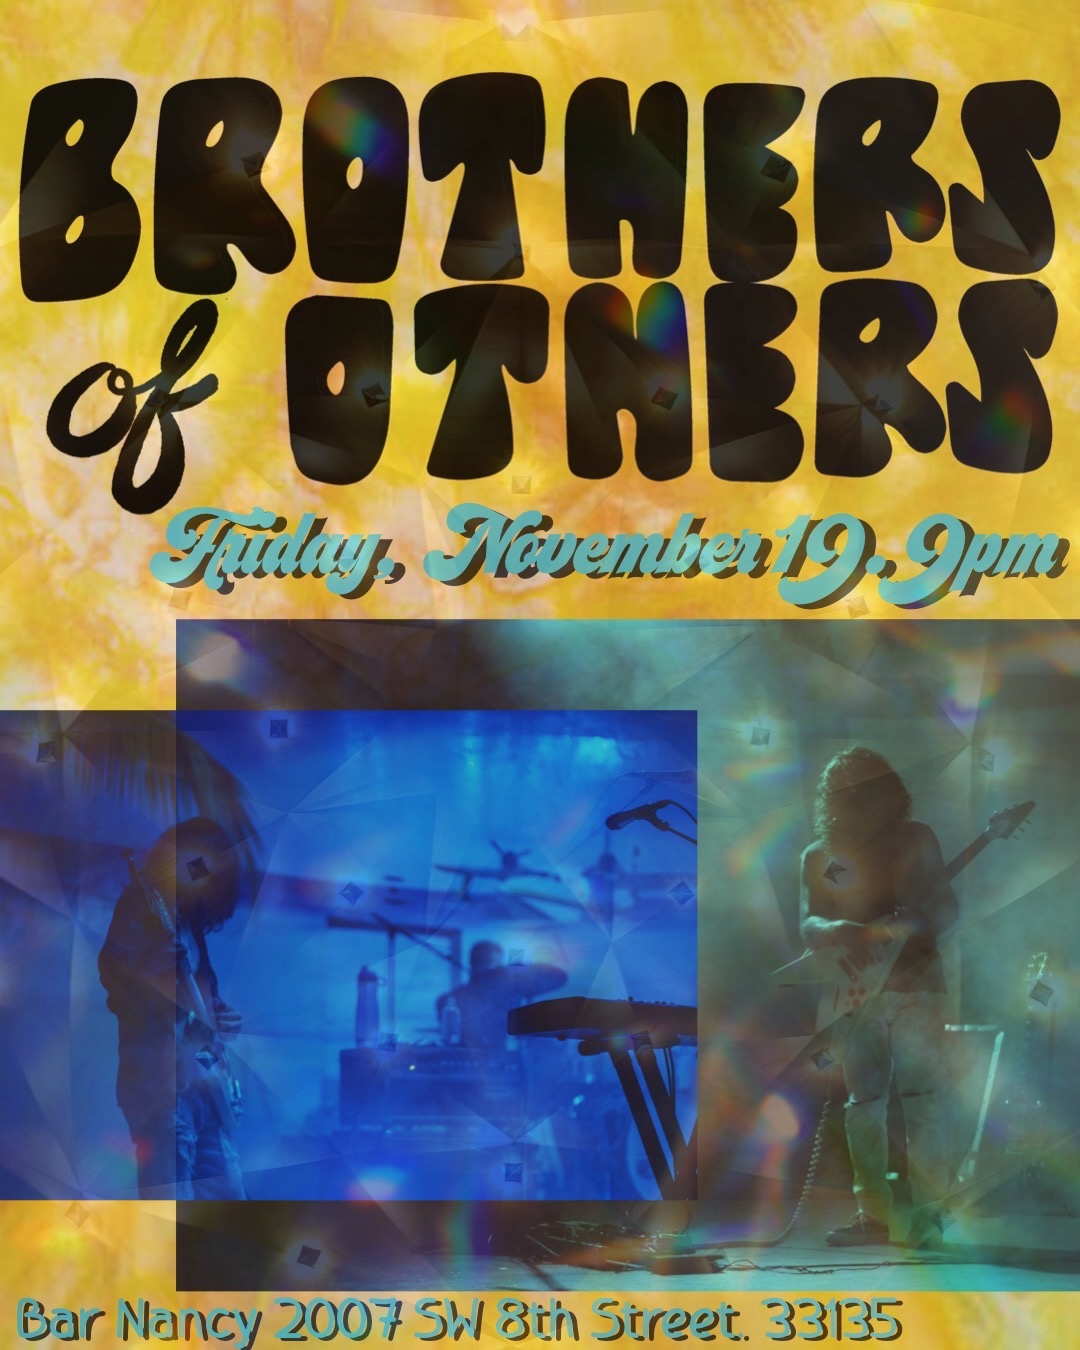 Brothers of Others at Bar Nancy